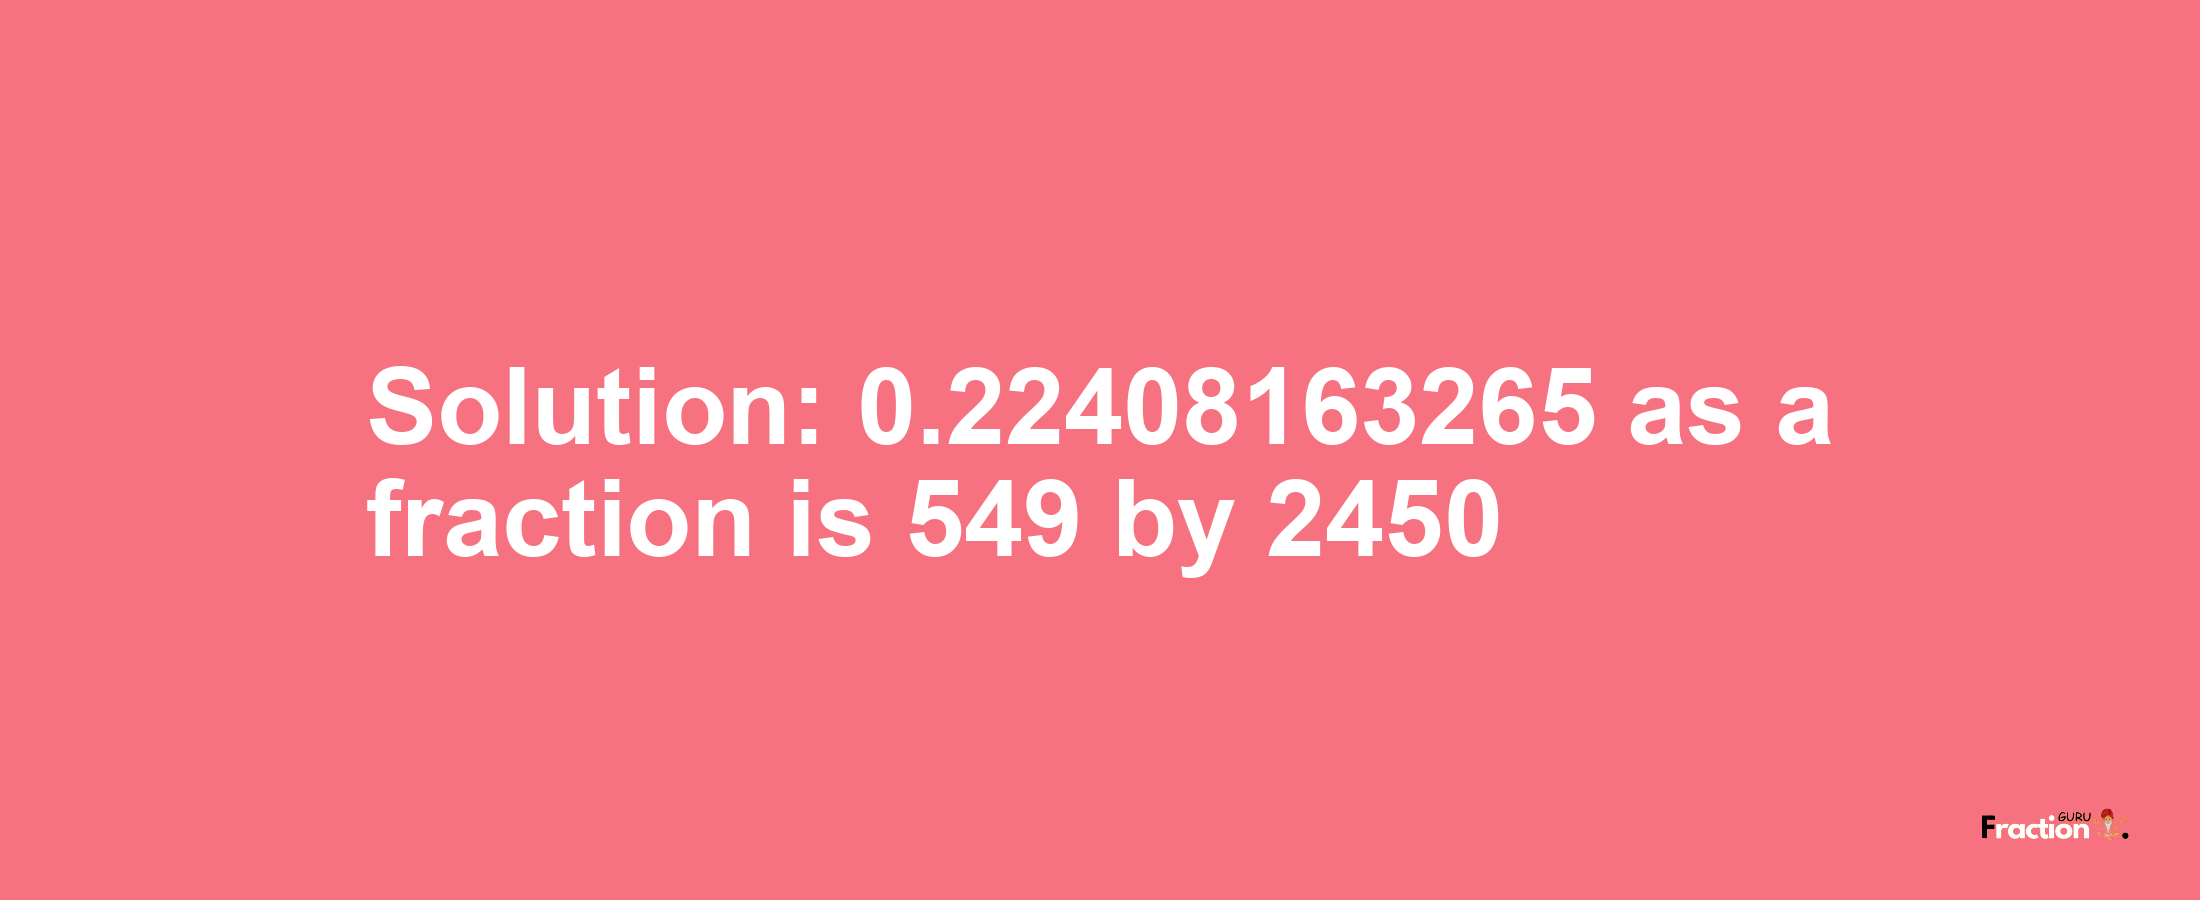 Solution:0.22408163265 as a fraction is 549/2450